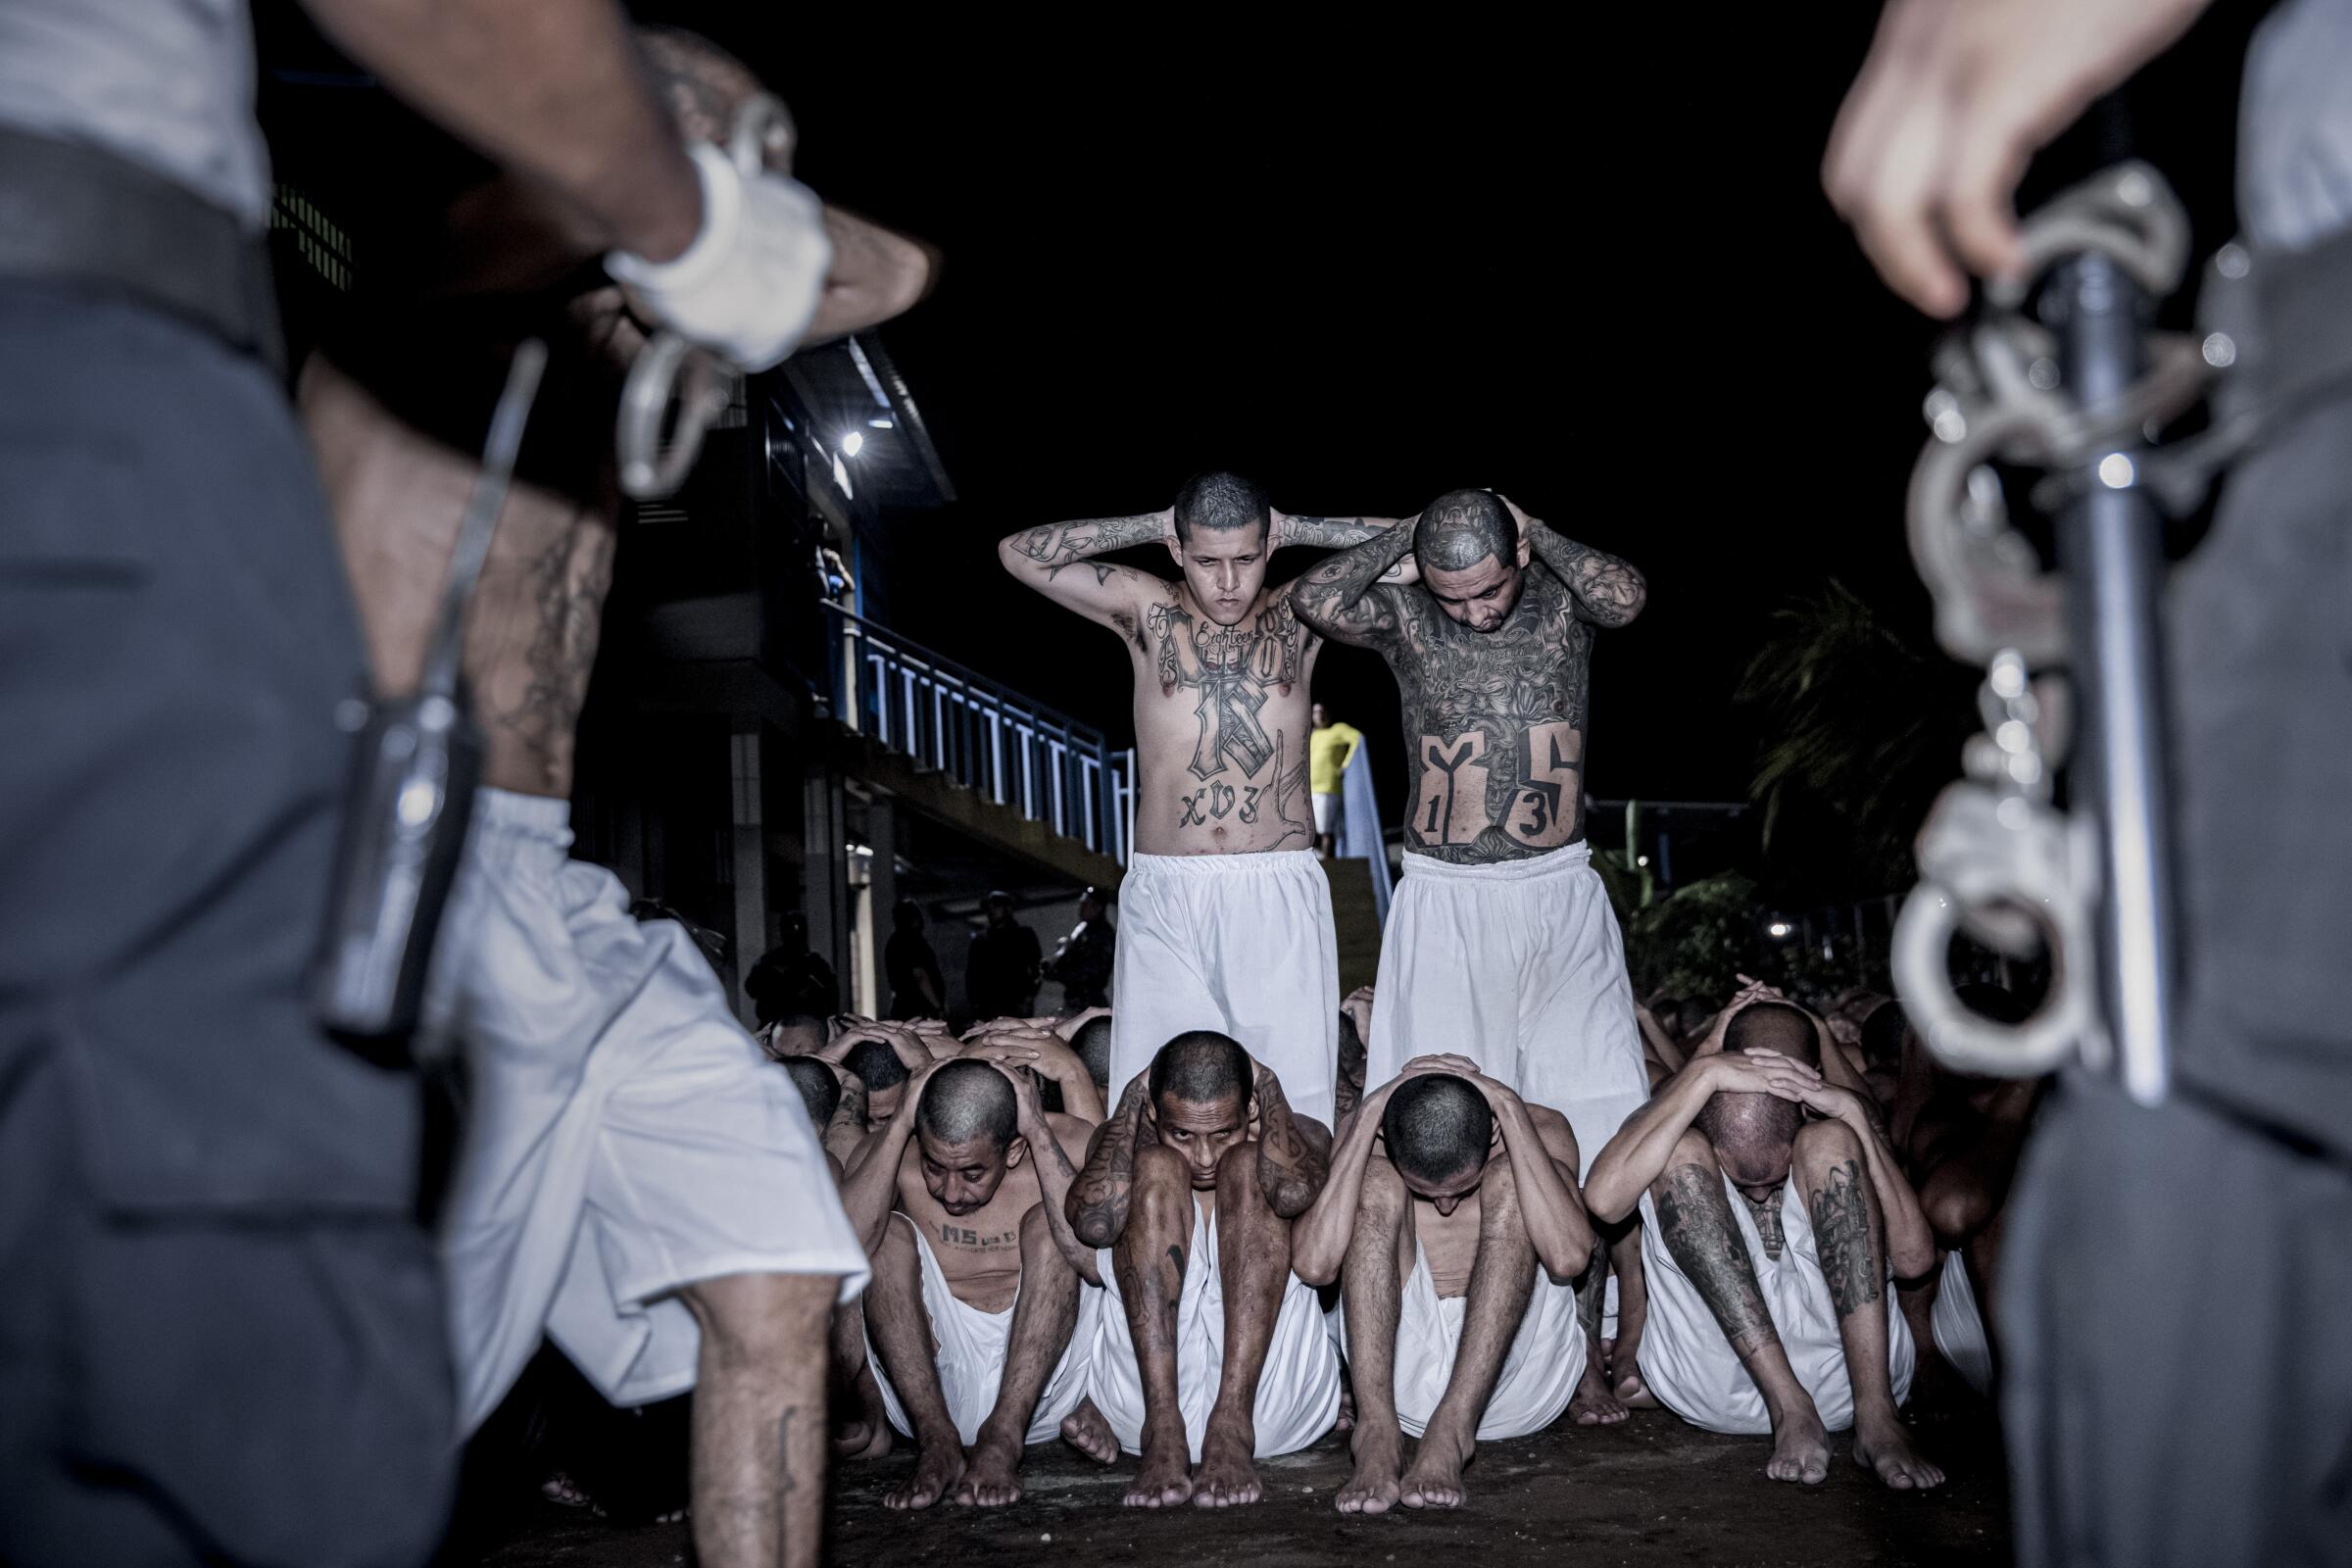 3 tattooed men in white boxers on their feet at night, hands behind their heads, as more sit facing 2 officers, foreground